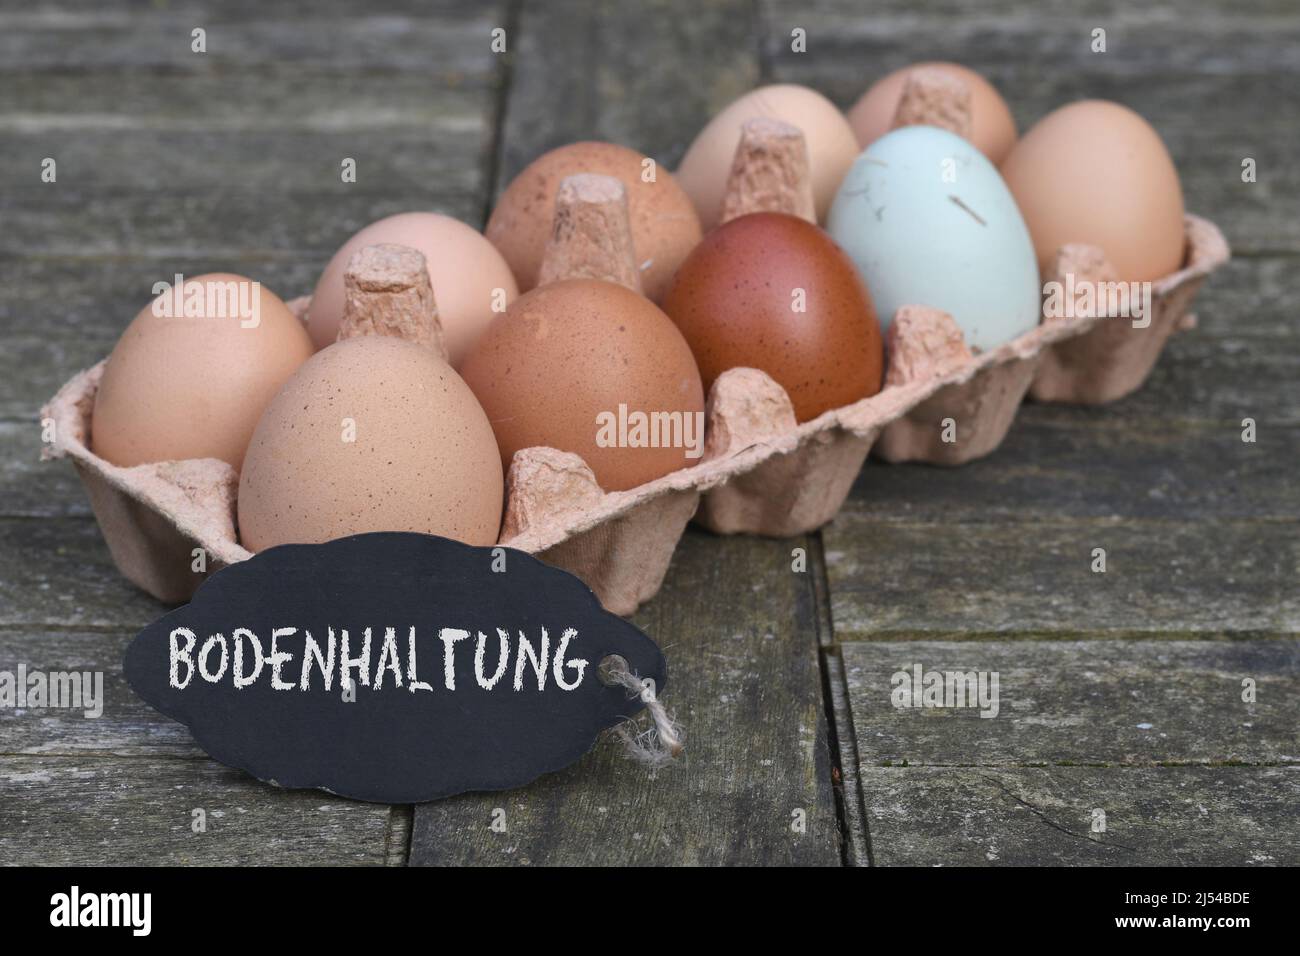 chalkboard with the inscription 'Bodenhaltung' in front of chicken eggs in the egg carton, Germany Stock Photo